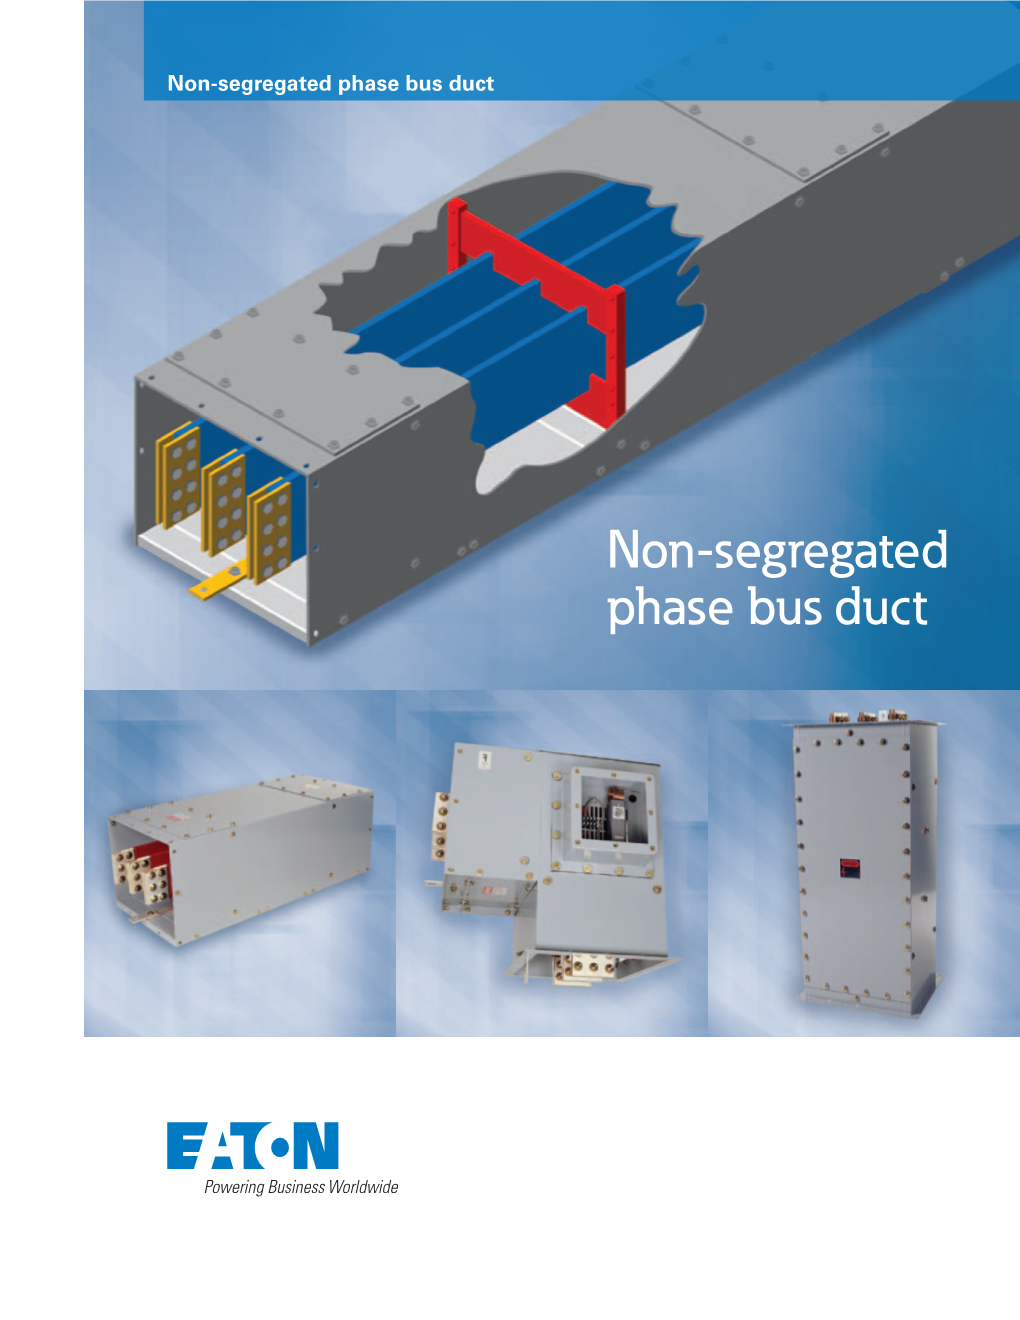 Non-Segregated Phase Bus Duct Brochure